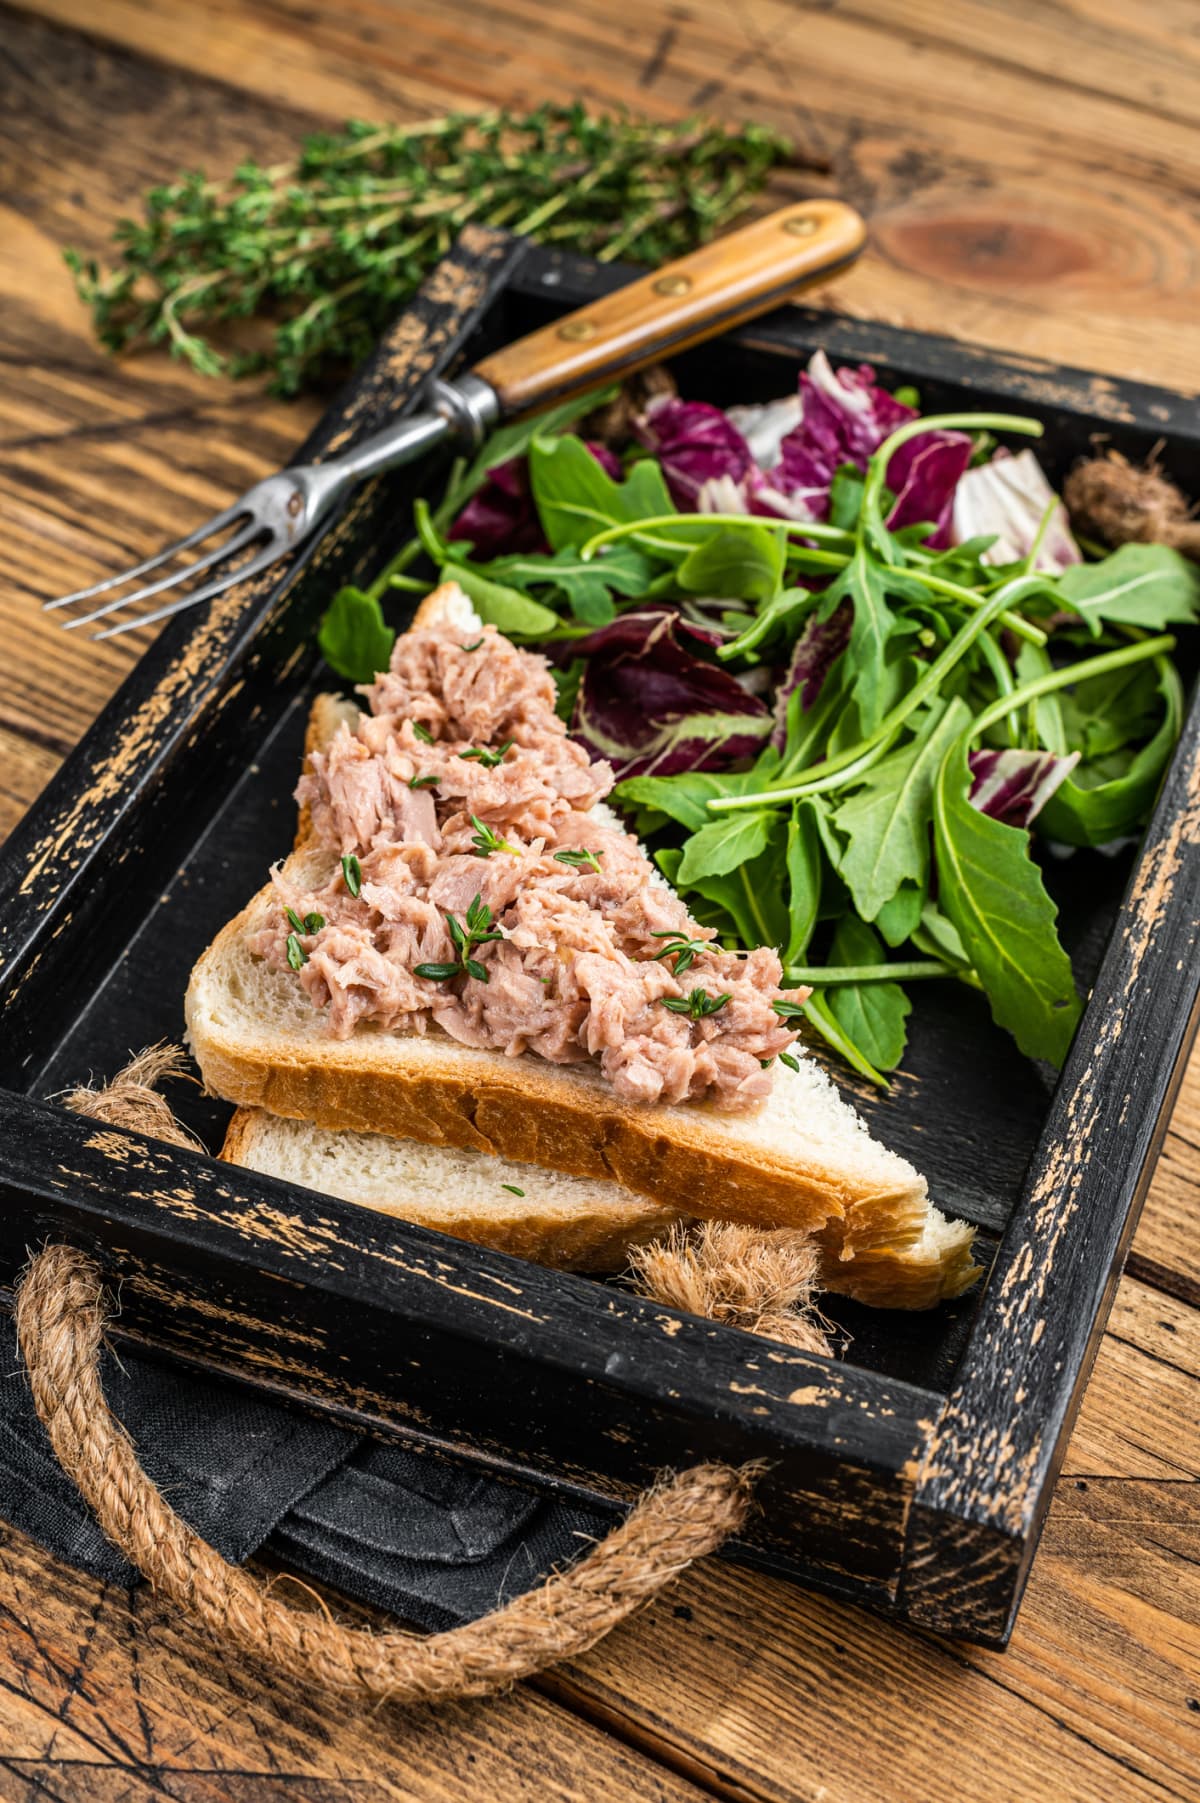 Tuna Salad Sandwich with Cheese, lettuce and arugula. Wooden background. Top view.